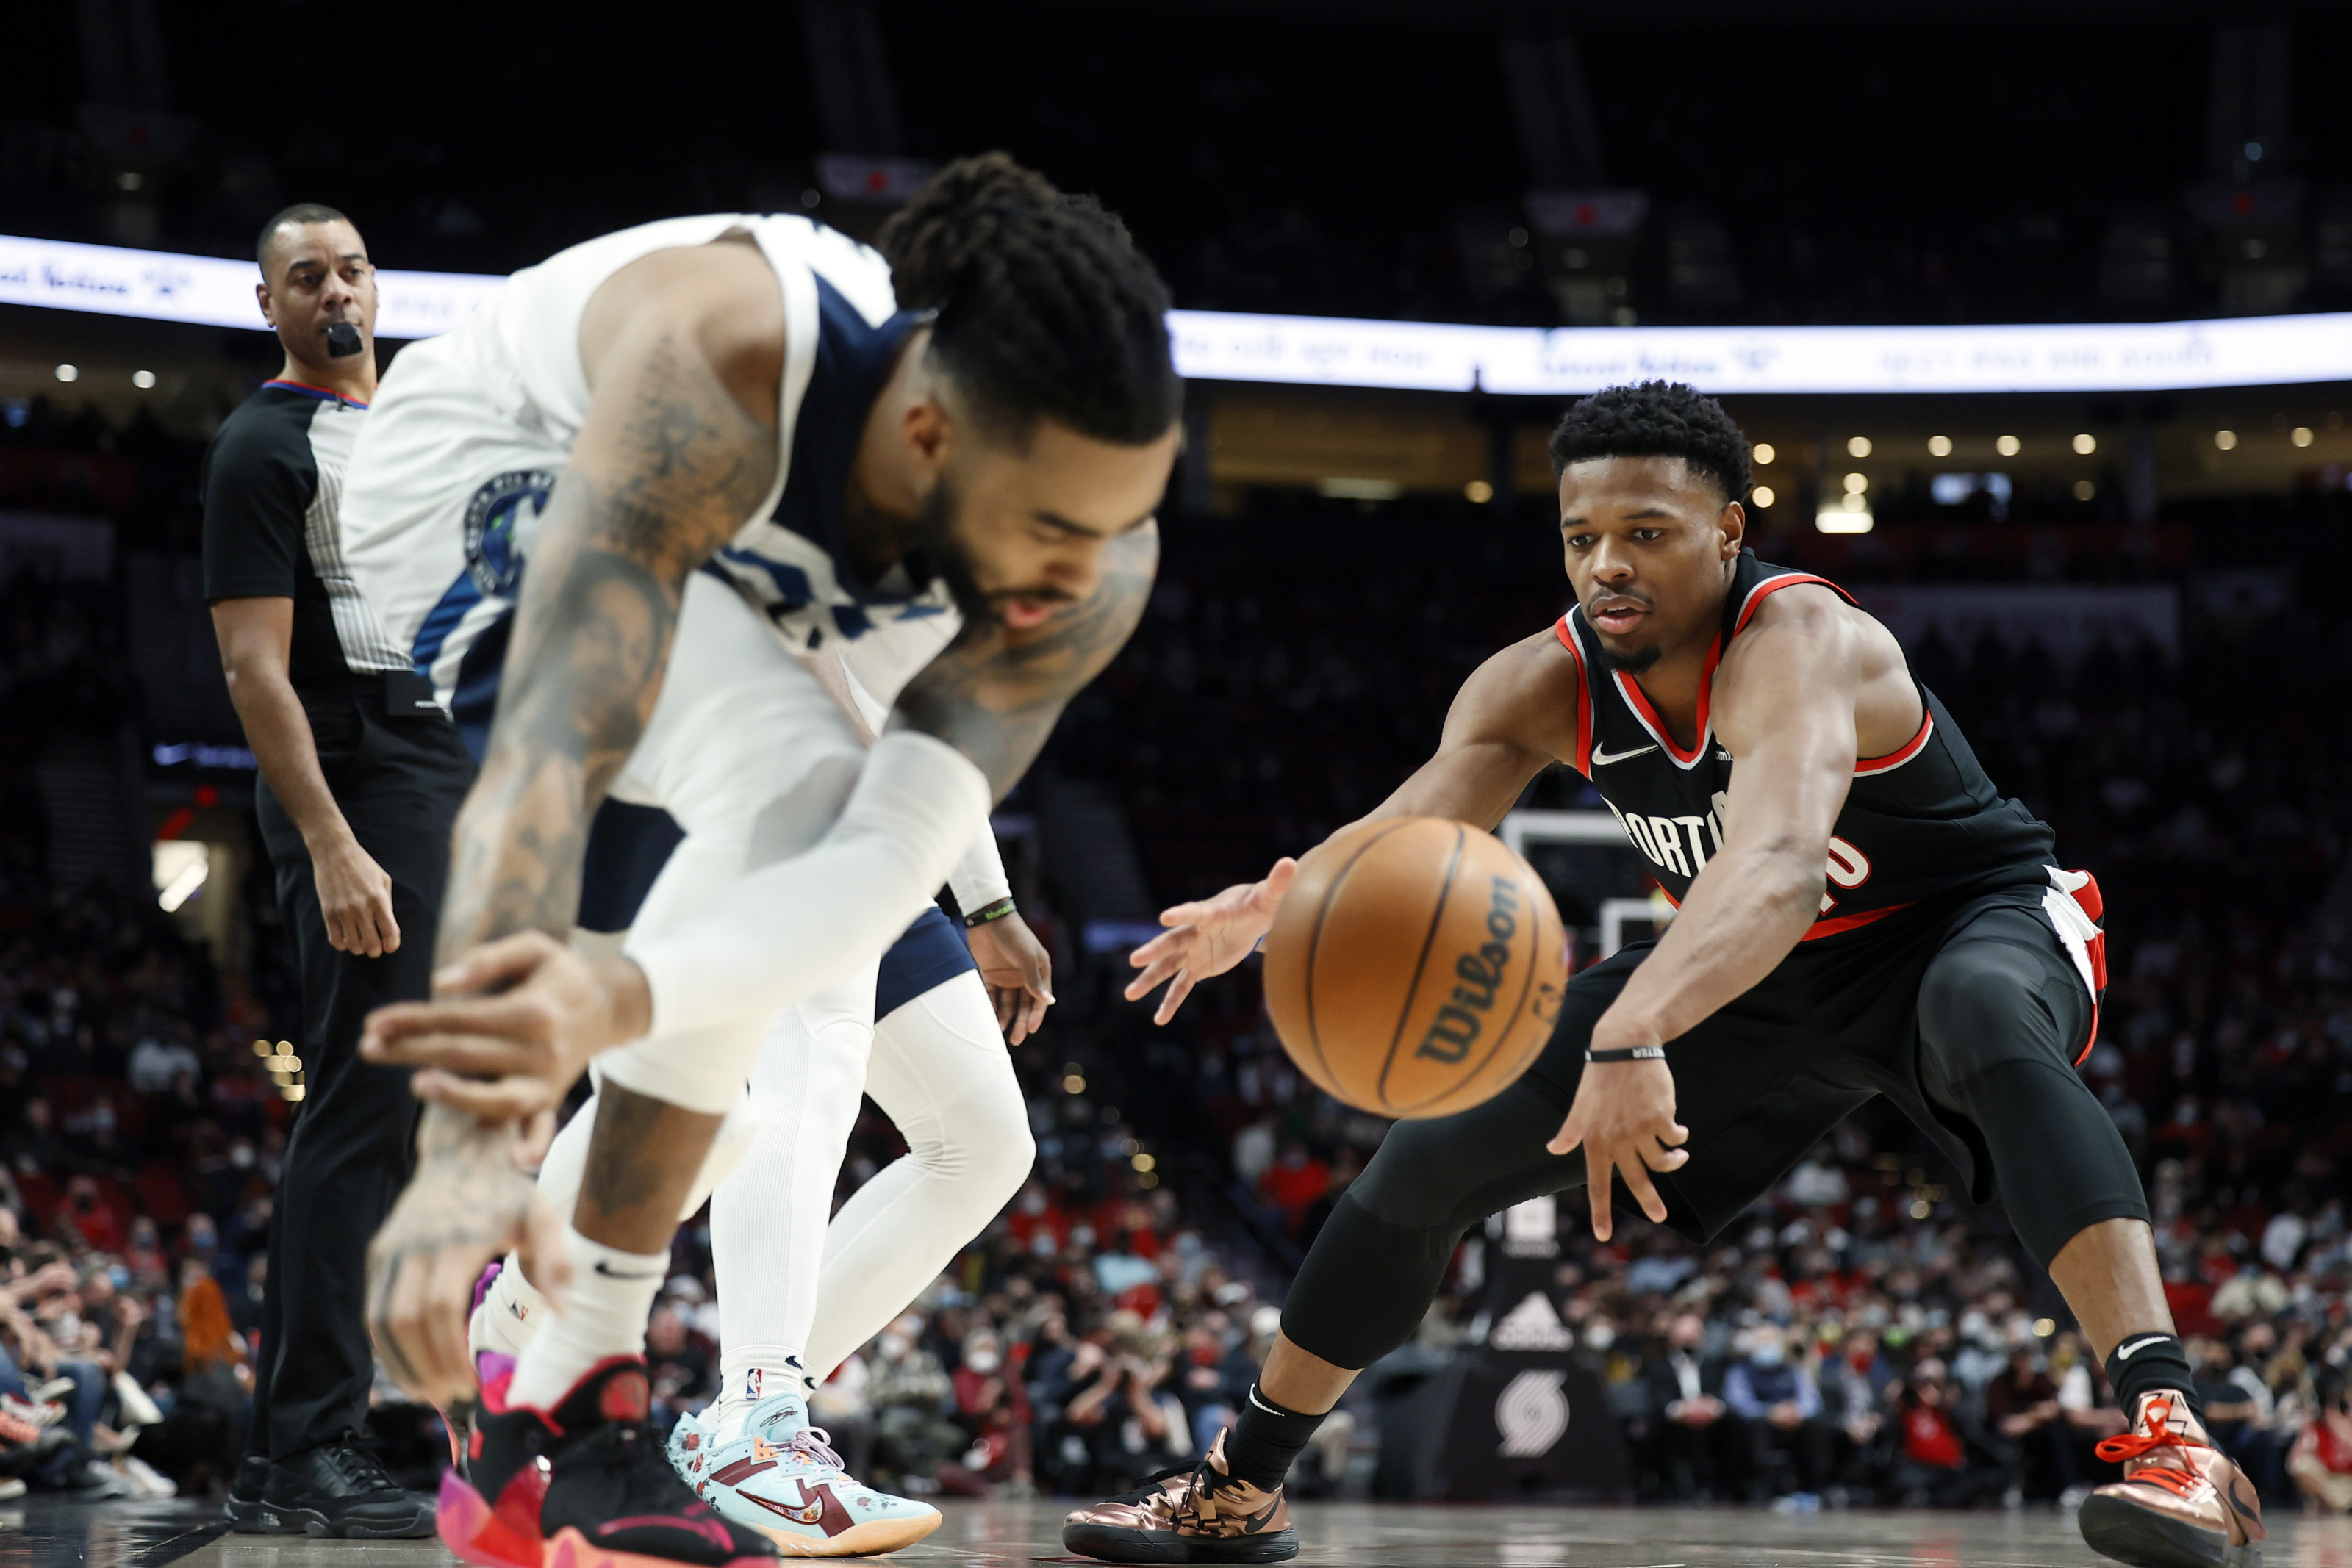 Portland Trail Blazers guard Dennis Smith Jr. dribbles during the